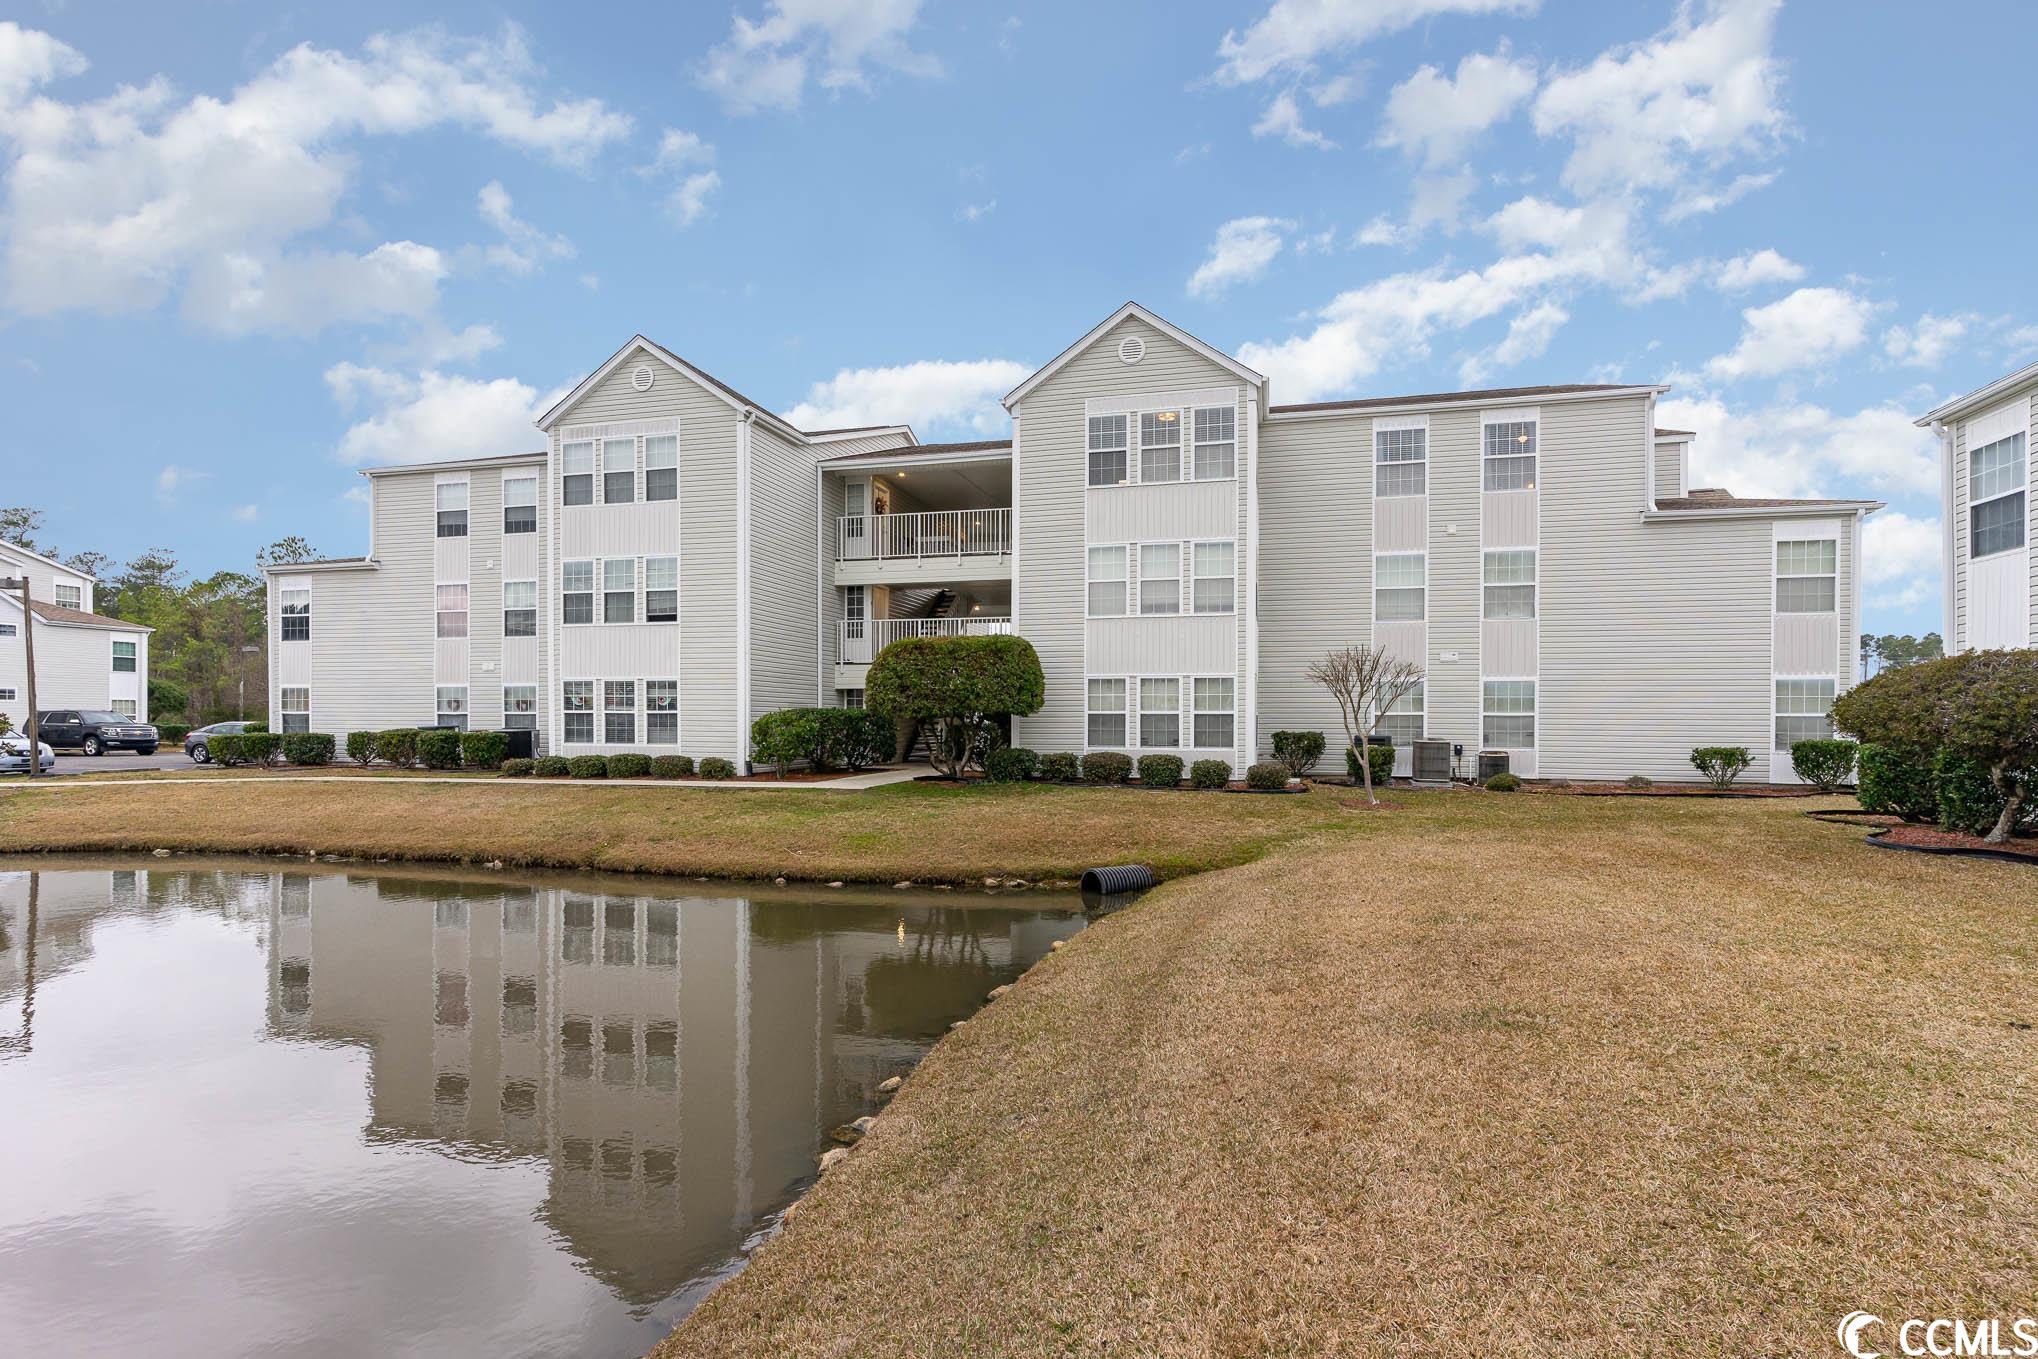 don't miss out on this beautiful surfside beach condo with a gorgeous, sun-filled carolina room that overlooks the pond. featuring cathedral ceilings, an electric fire place, beach decor, a new hvac unit and abundant closet space, this well-maintained 2-bedroom, 2-bathroom condo presents a great opportunity as a vacation home, rental investment or permanent residence.  it comes fully furnished and is ready for you to move right in.    southbridge is in an ideal location, close to the beach (about 1.5 miles), golf courses, myrtle beach state park and myrtle beach international airport.